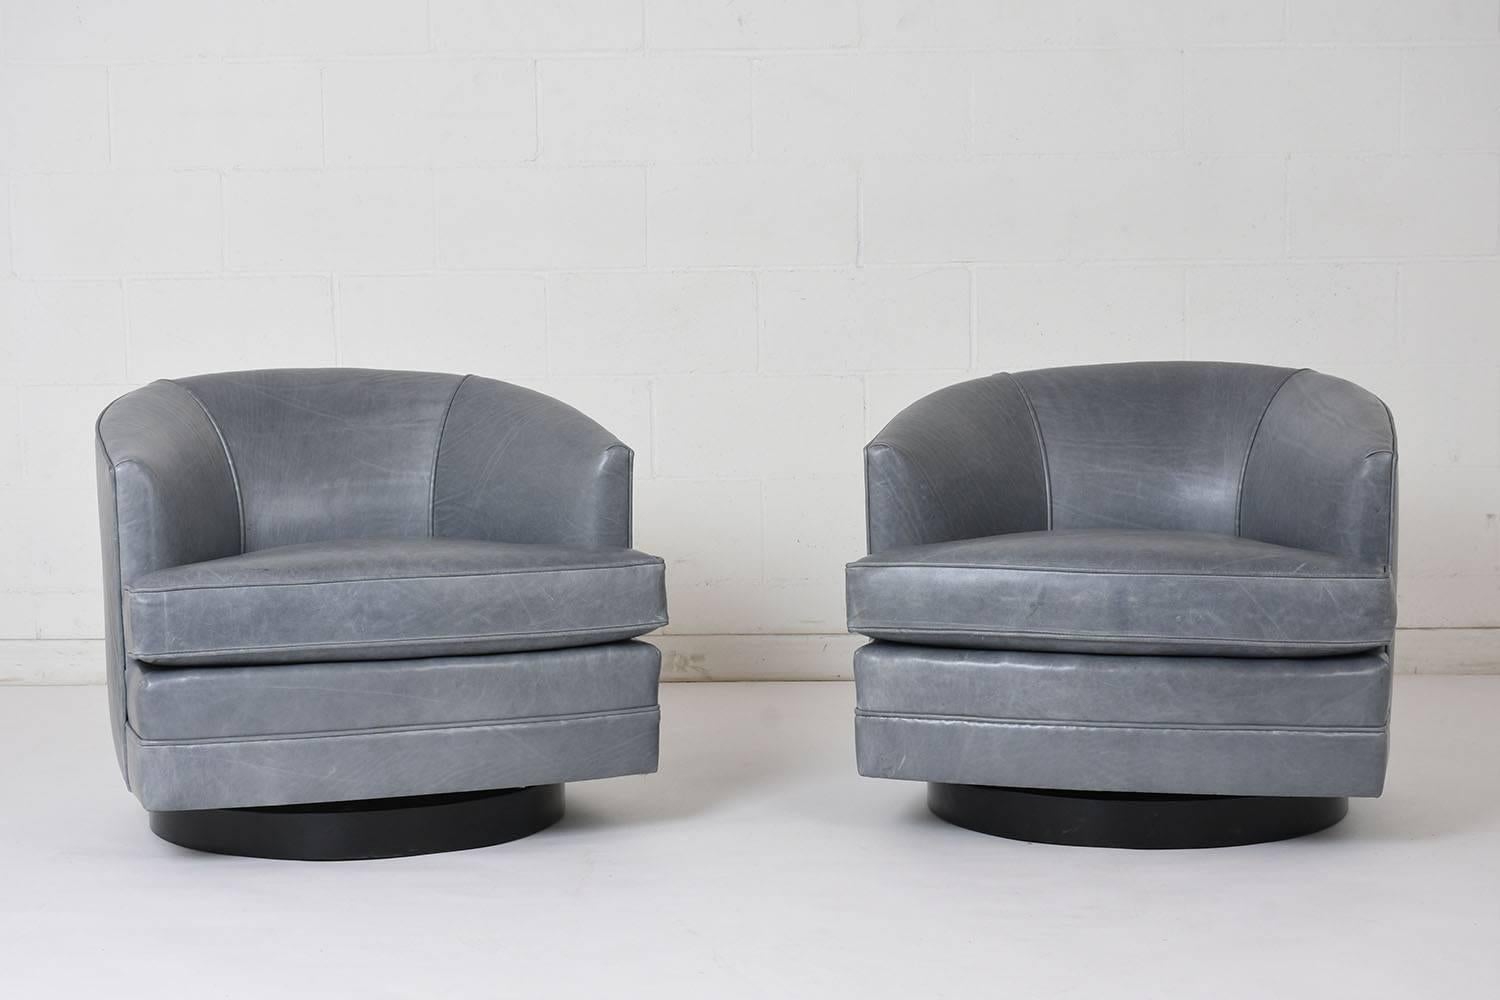 African Pair of Mid-Century Modern Style Leather Swivel Lounge Chairs